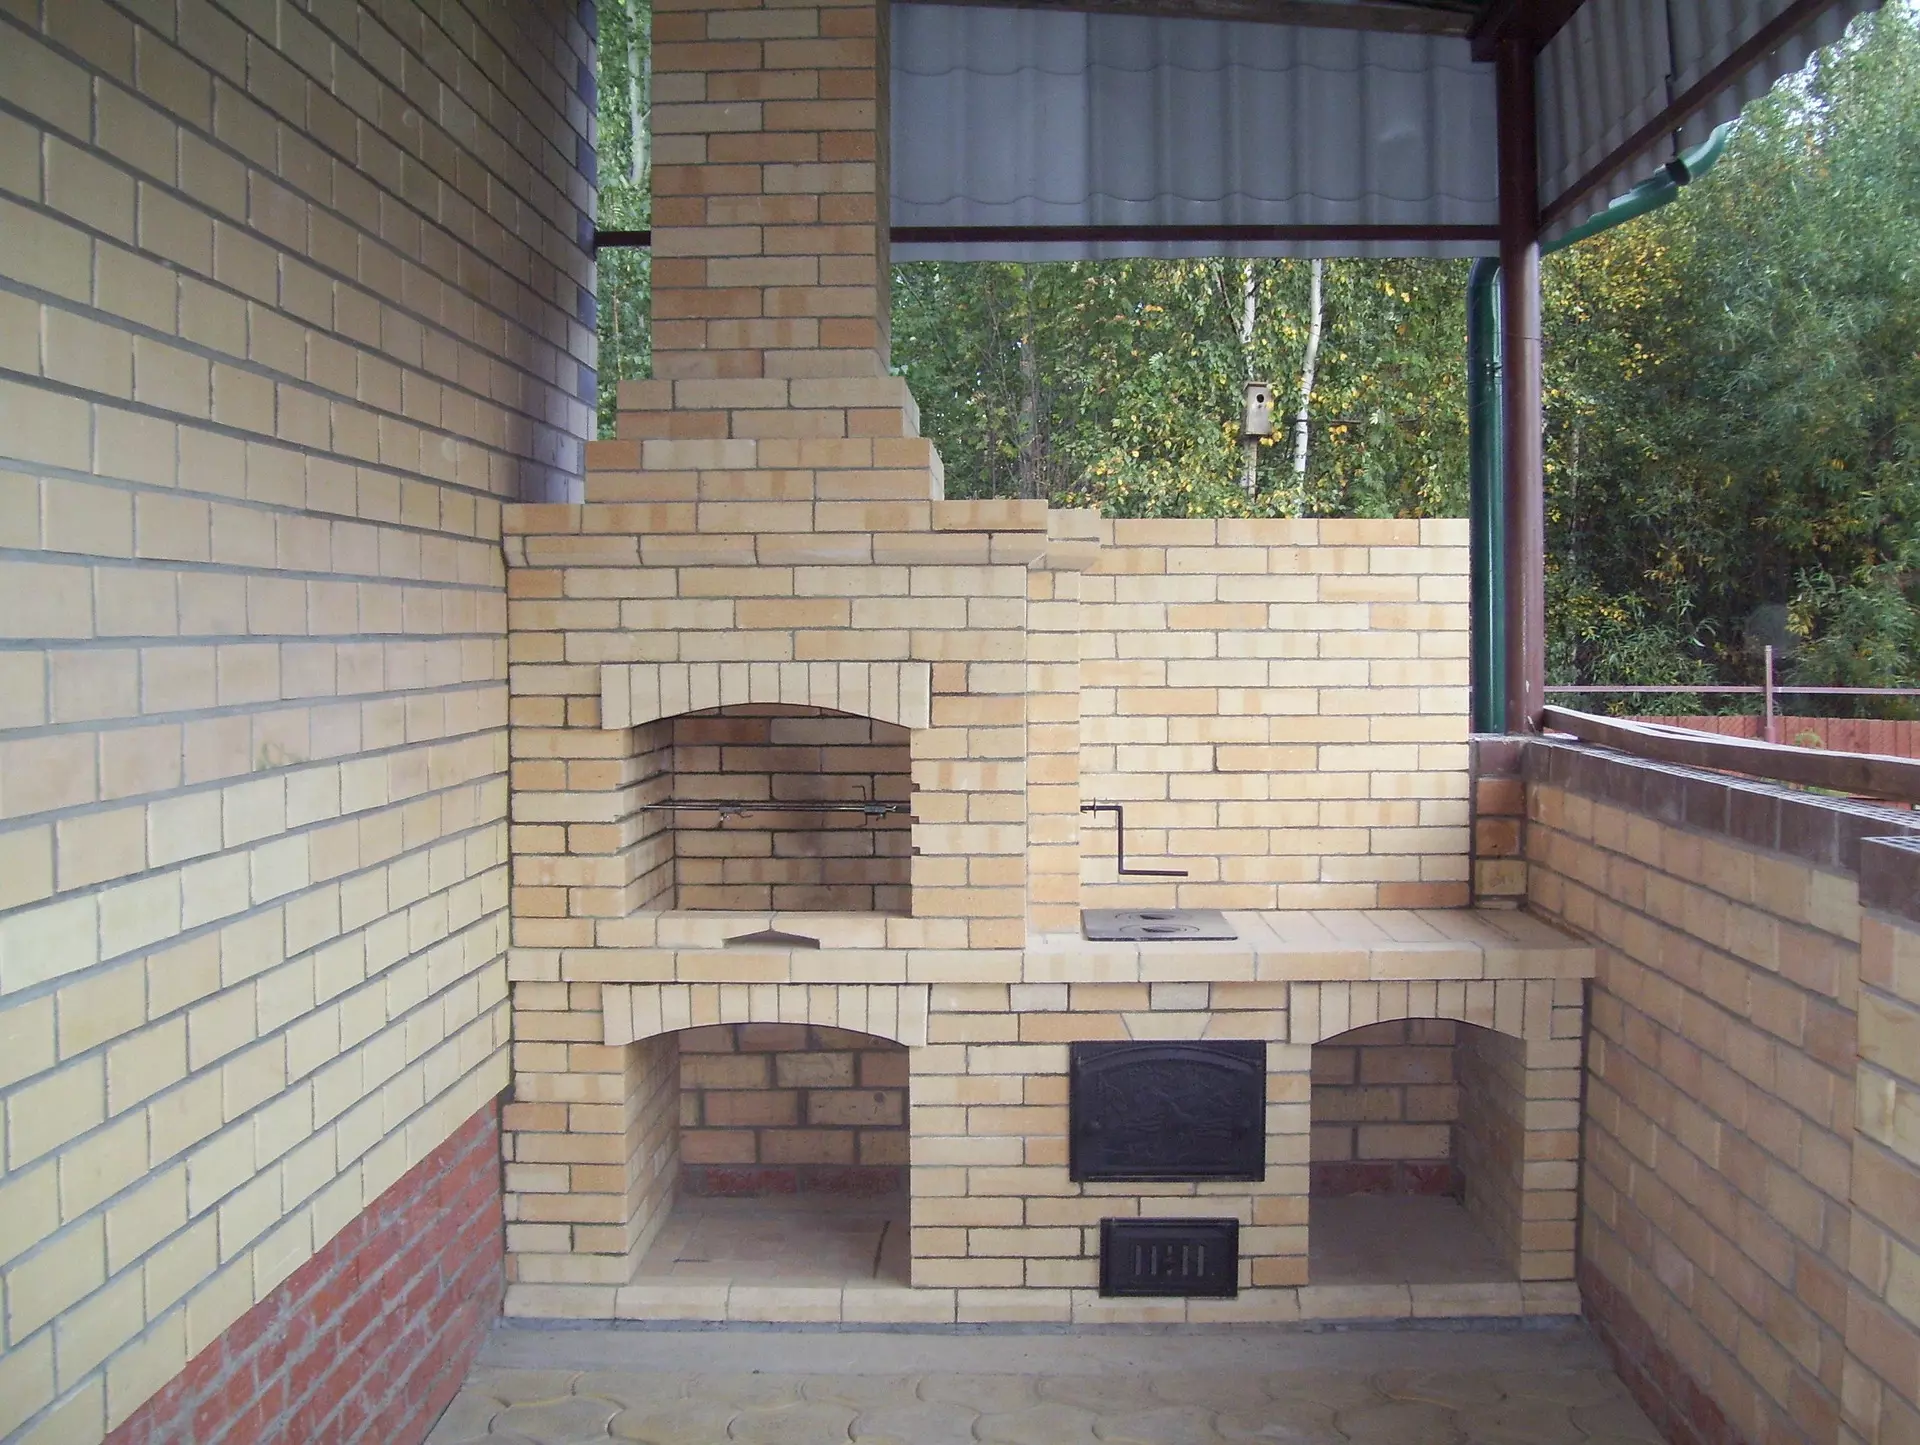 Wisconsin Houses for Sale with Fireplace 210K to 219K